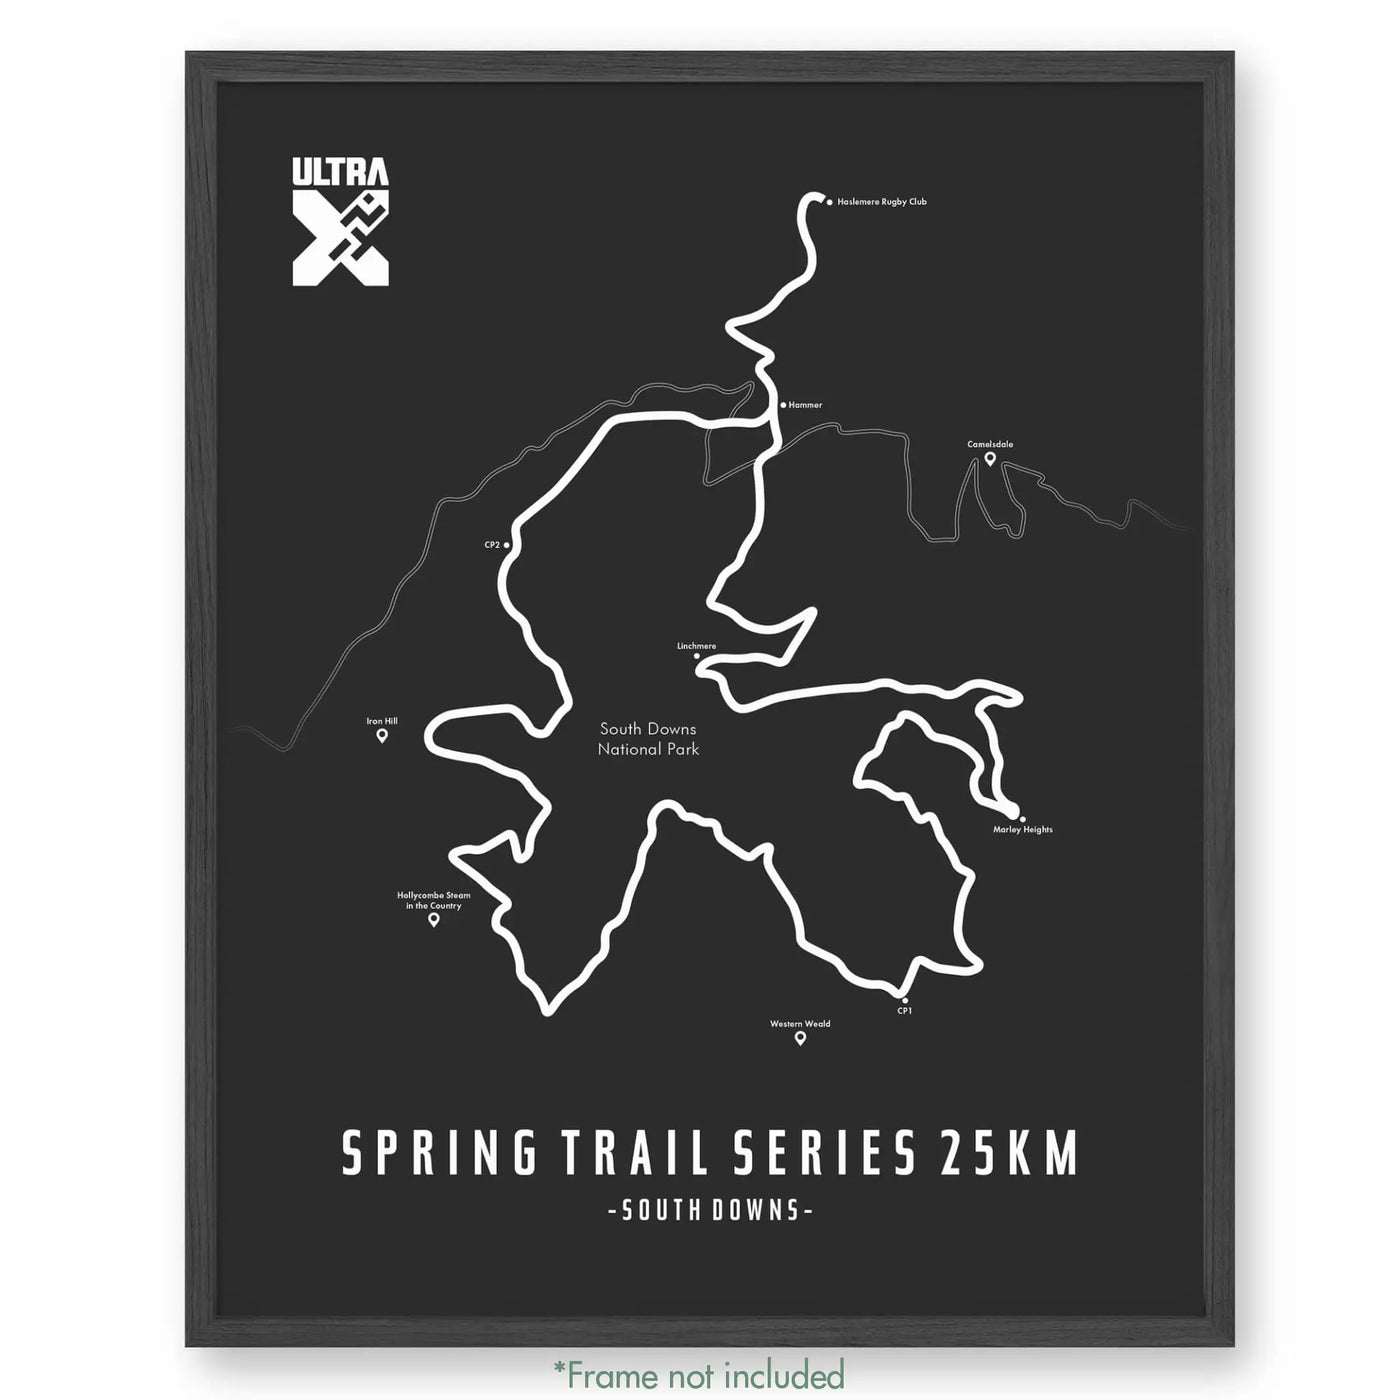 Trail Poster of Ultra X Spring Trail Series 25km - Grey